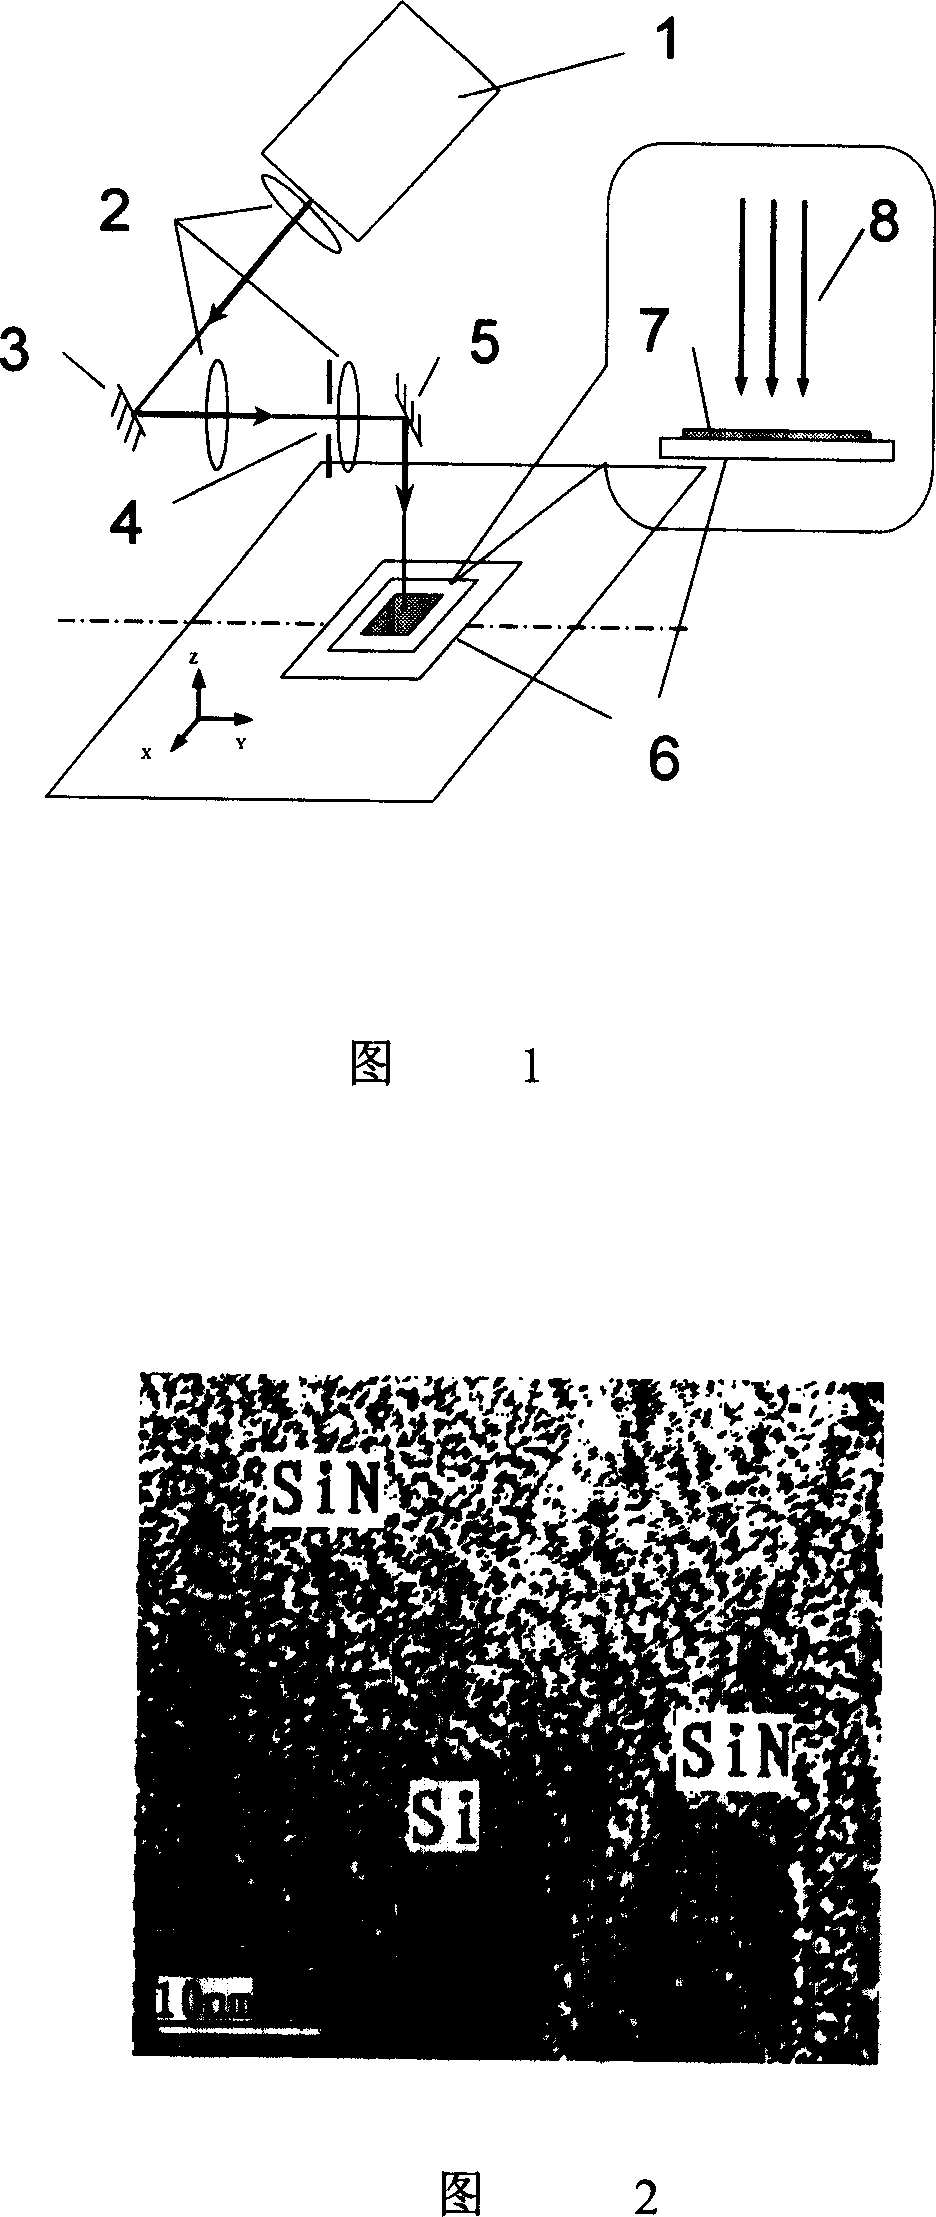 High-performance semiconductor nanometer silicon field electronic emission material and its preparation method